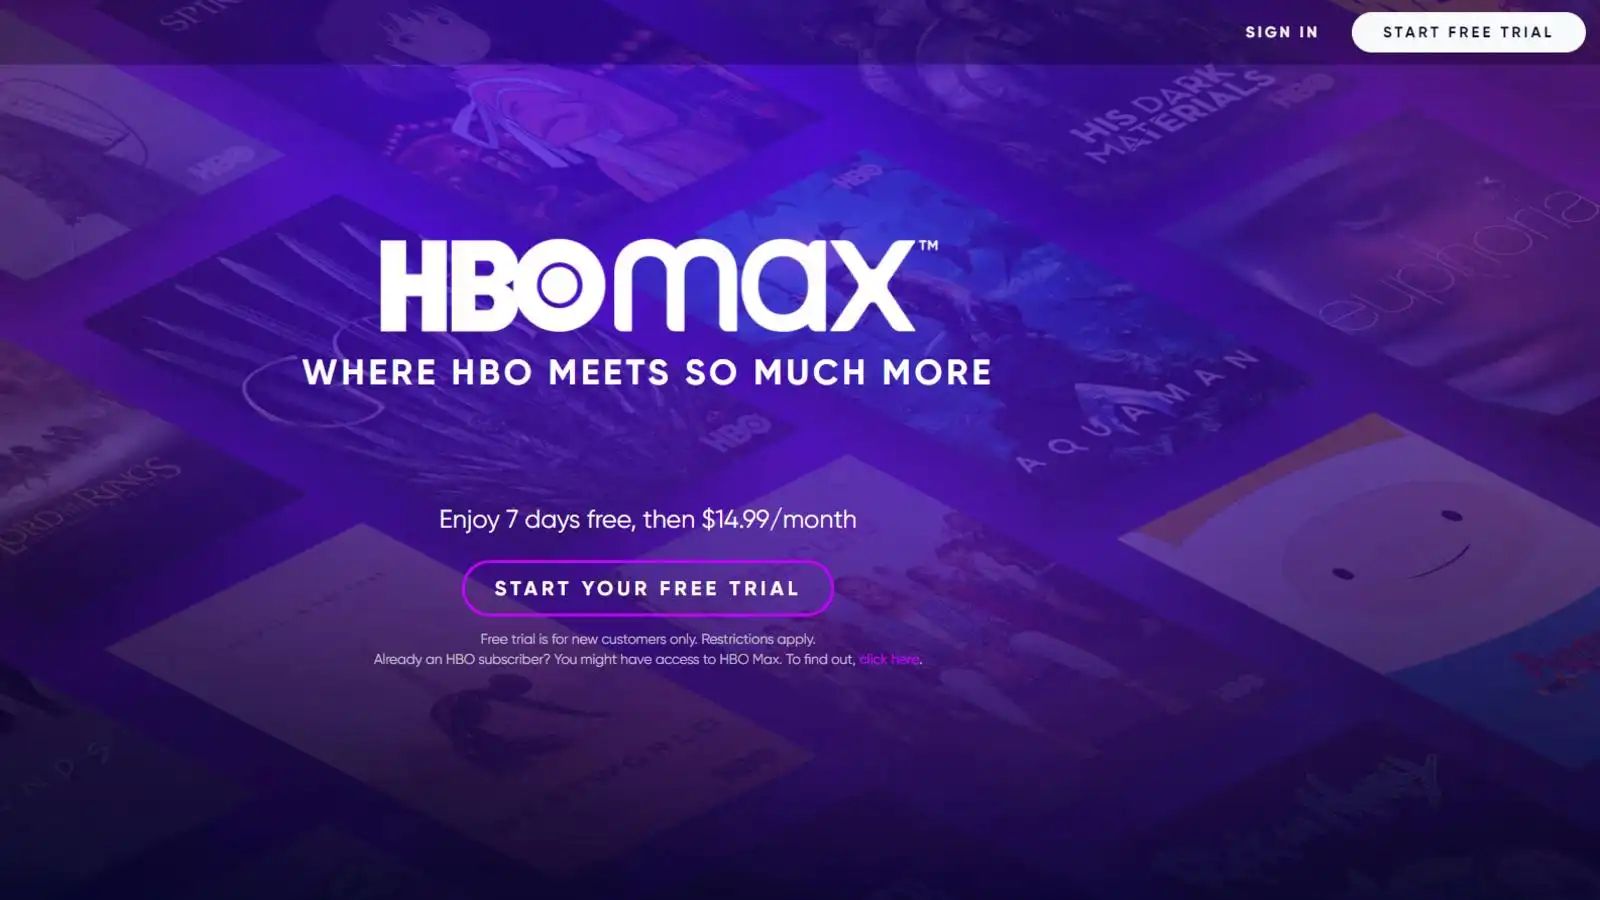 How To Share HBO Max Account